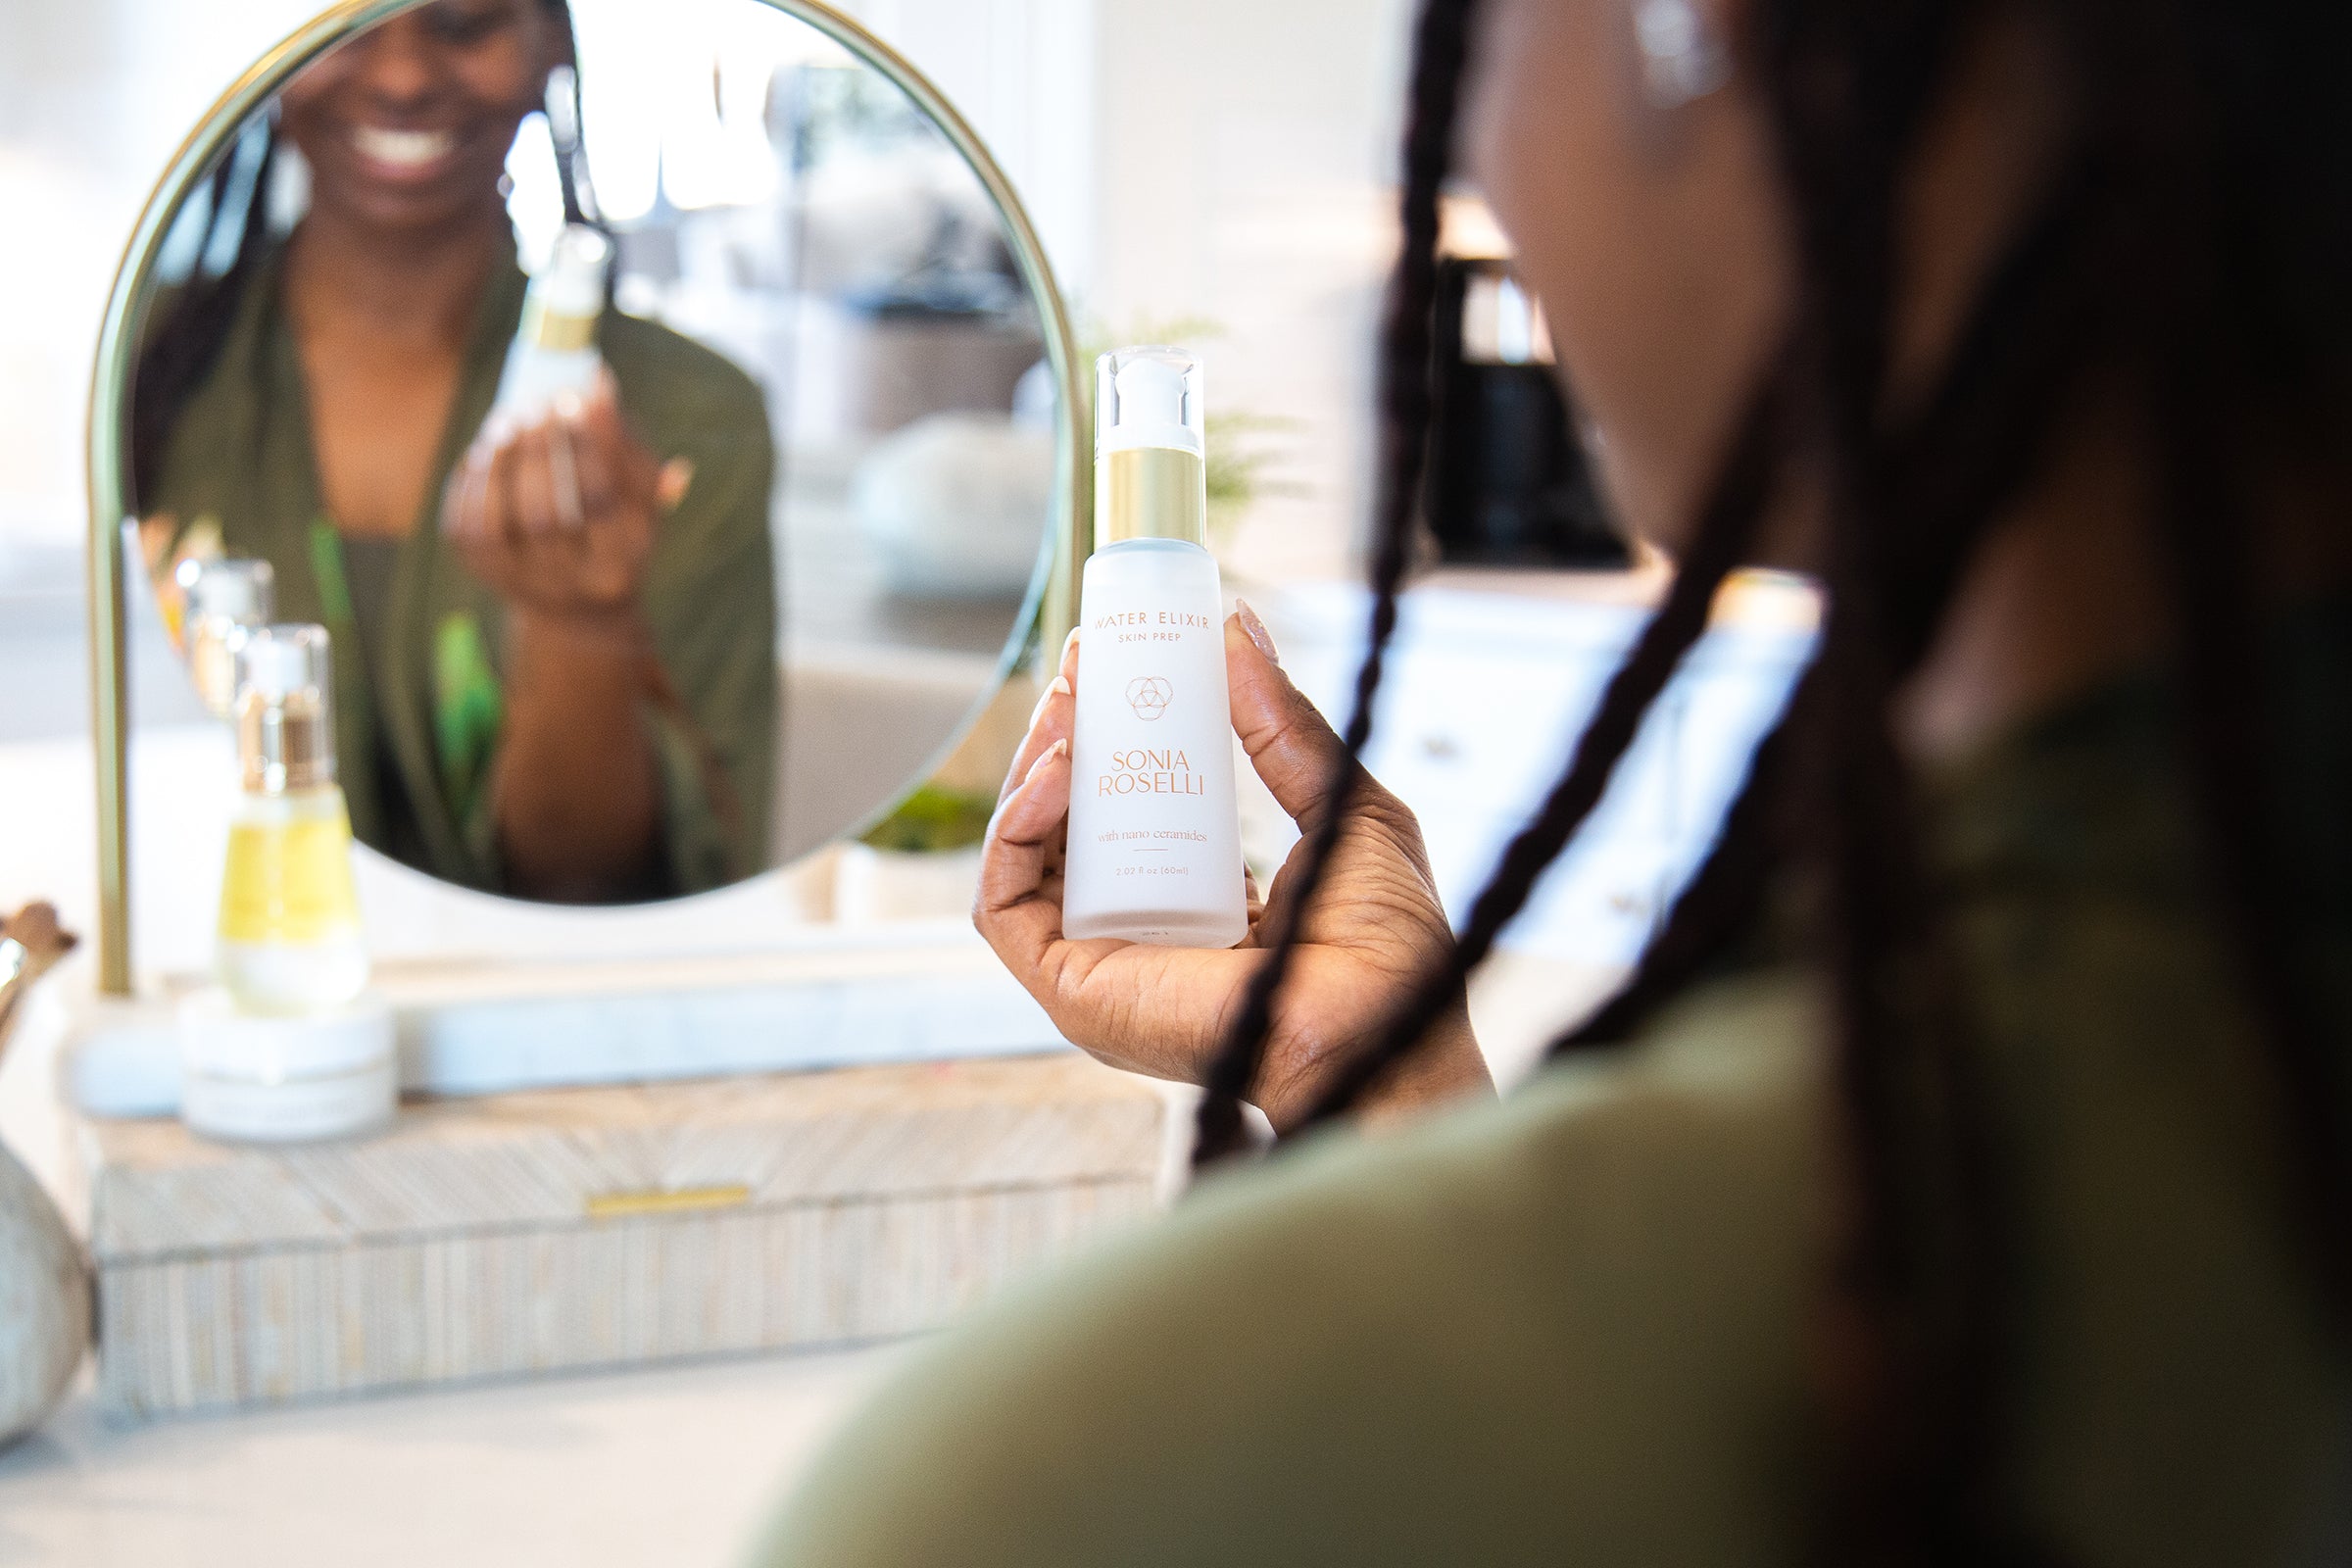 In front of a well-lit mirror, a woman confidently holds a bottle of Sonia Roselli Beauty's Water Elixir, her reflection showcasing a sense of empowerment and radiance. This image encapsulates the transformative potential of the product, promising a revitalized and luminous complexion.